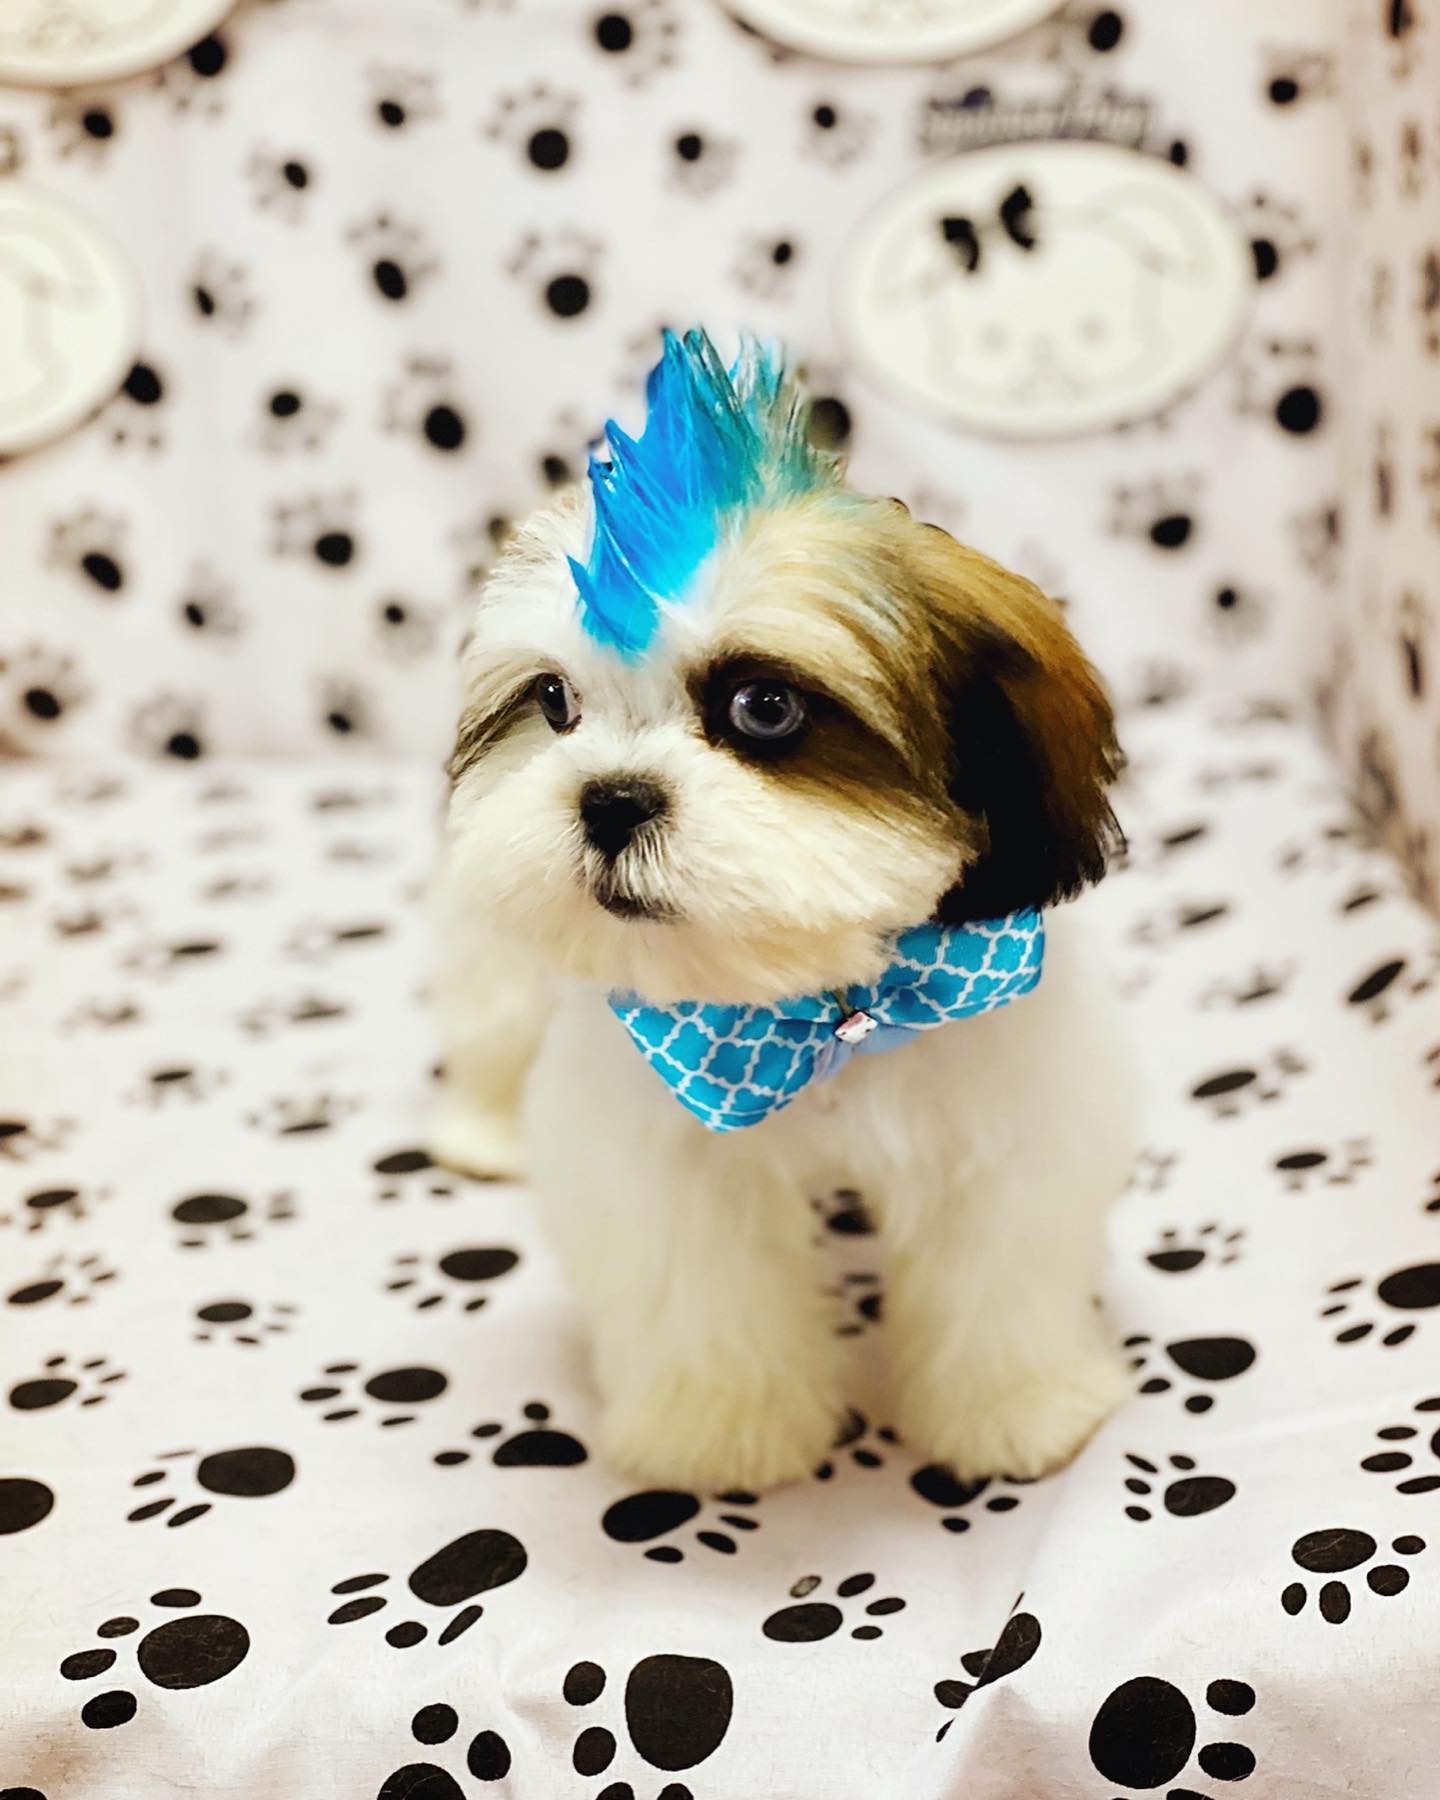 Spoiled Pup LV - Dog Grooming - Puppies for Sale